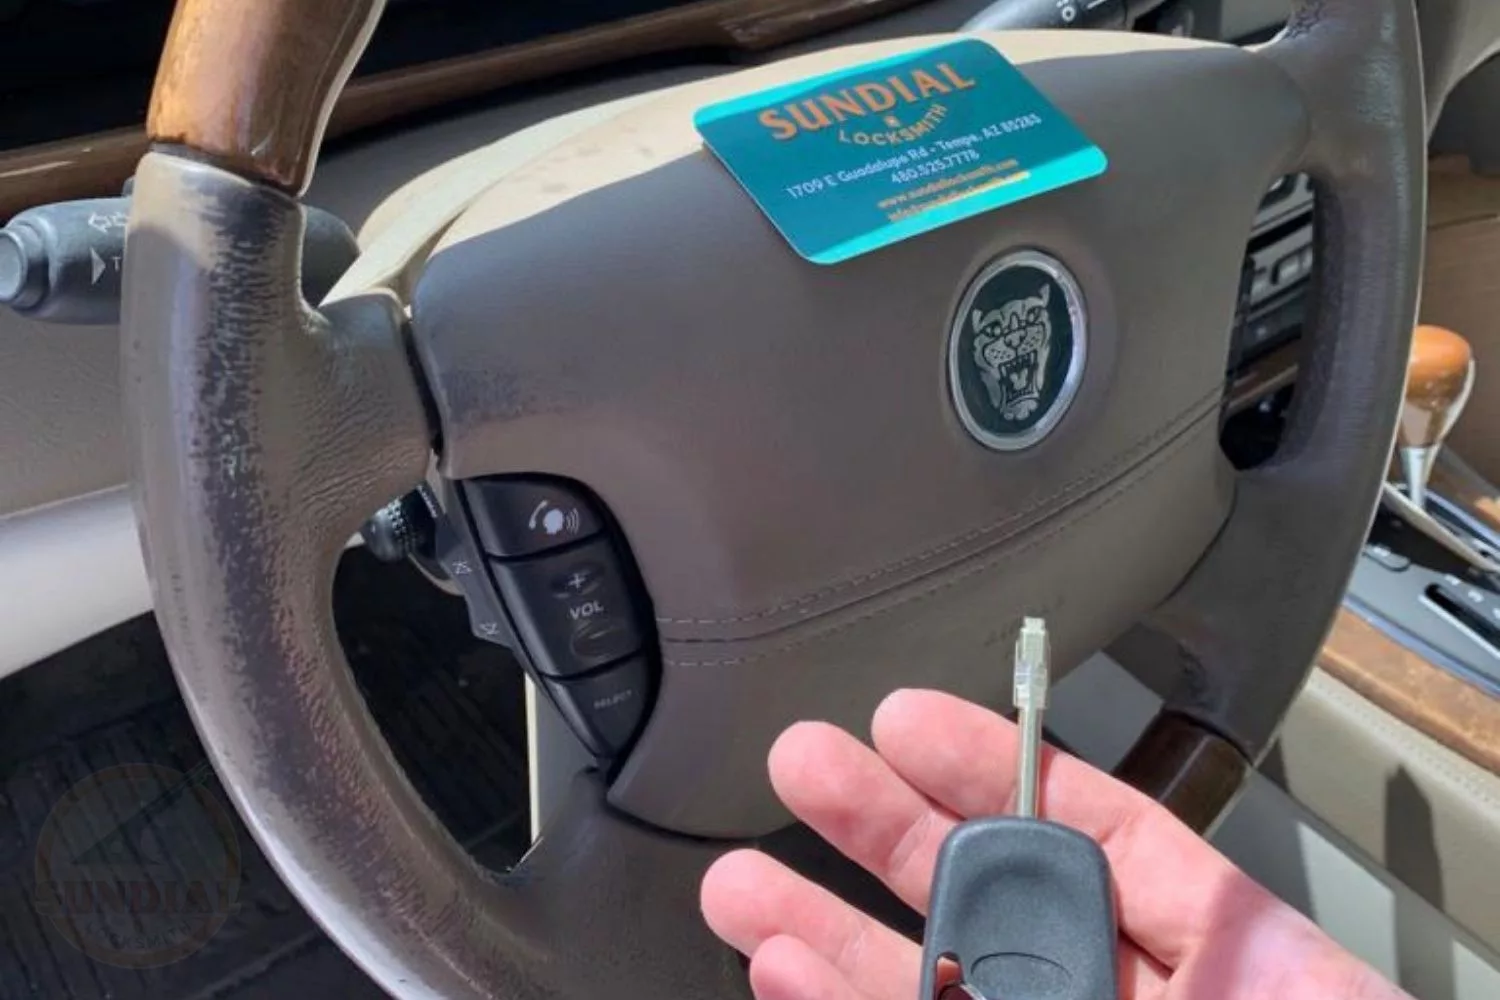 Close-up view of a Jaguar steering wheel with controls, with a 'SUNDIAL Locksmith' card placed on the dashboard and a hand holding a Jaguar car key in the foreground.